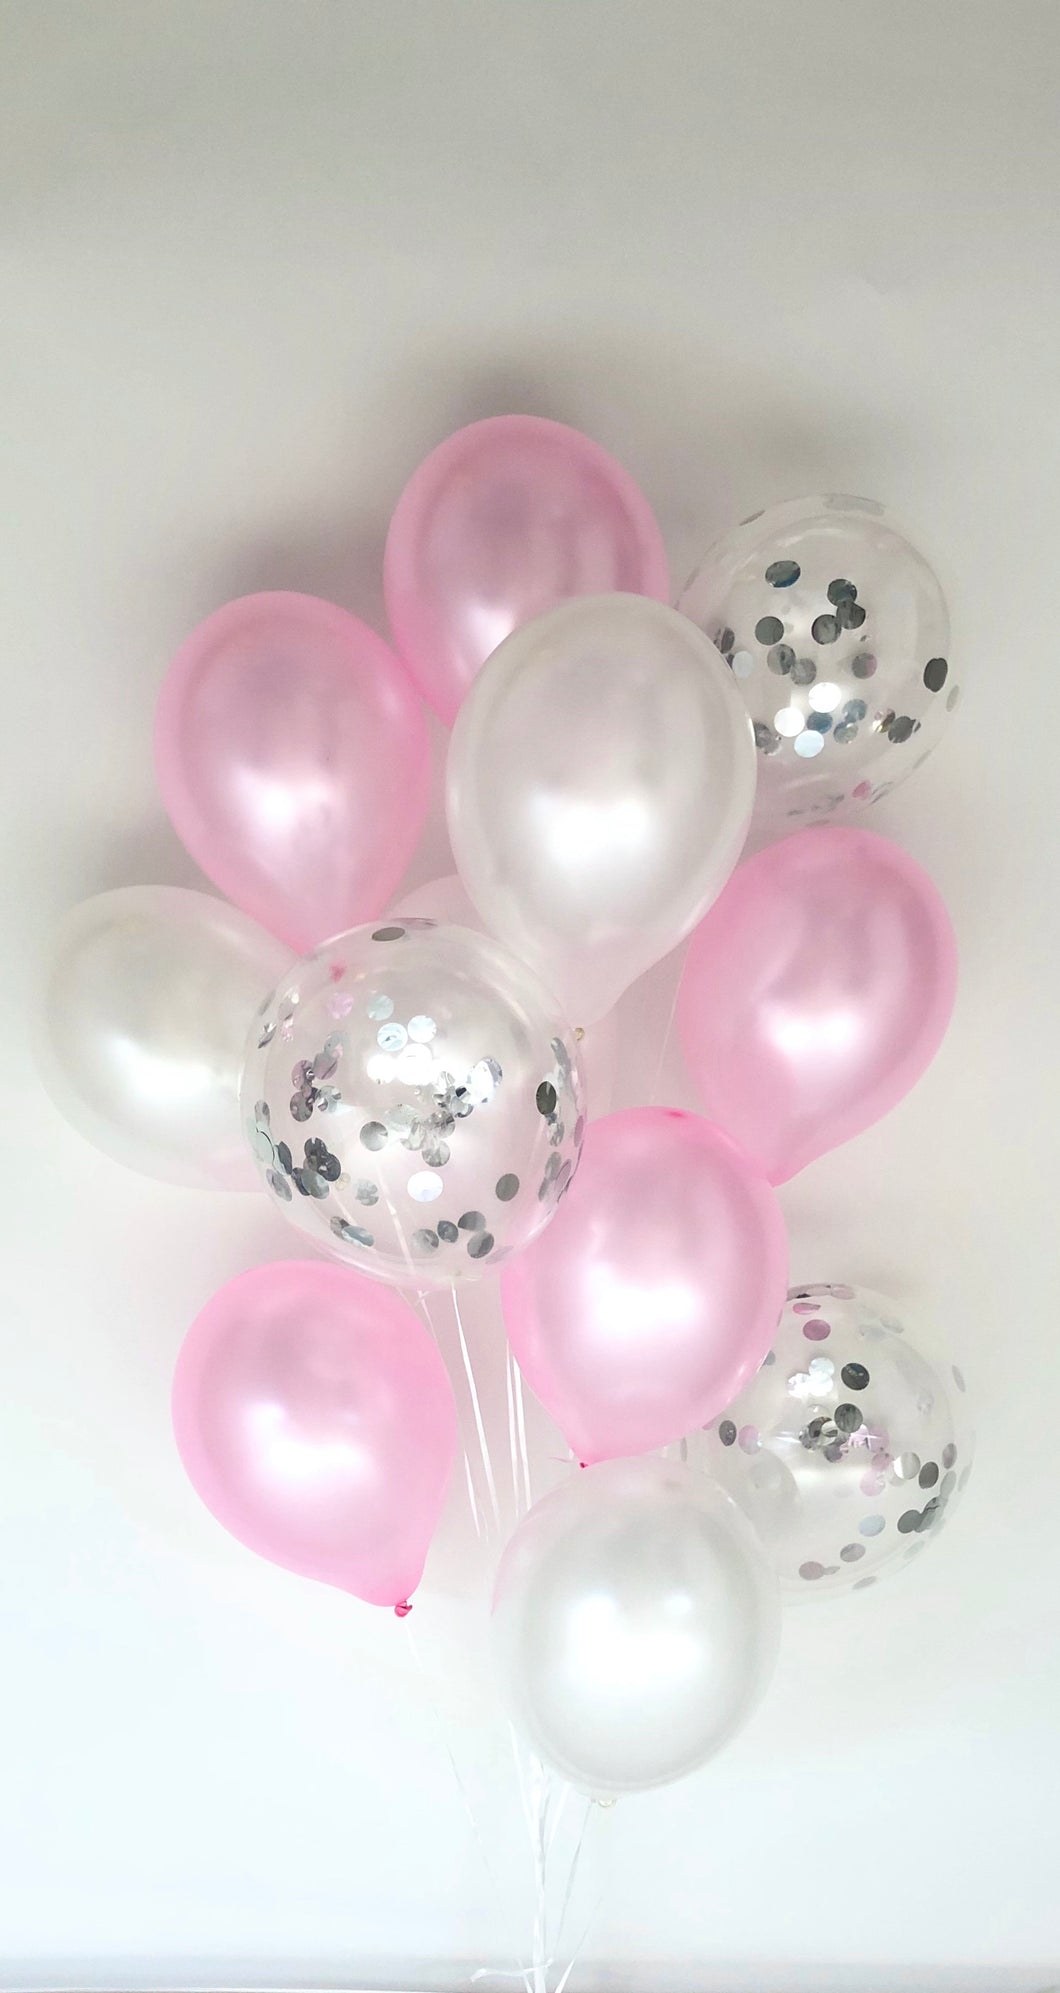 Sweet Moon 12 Piece Latex Balloons Bouquet - Baby Shower, Bridal Shower, Eid, and Ramadan Party Decoration (Pink)